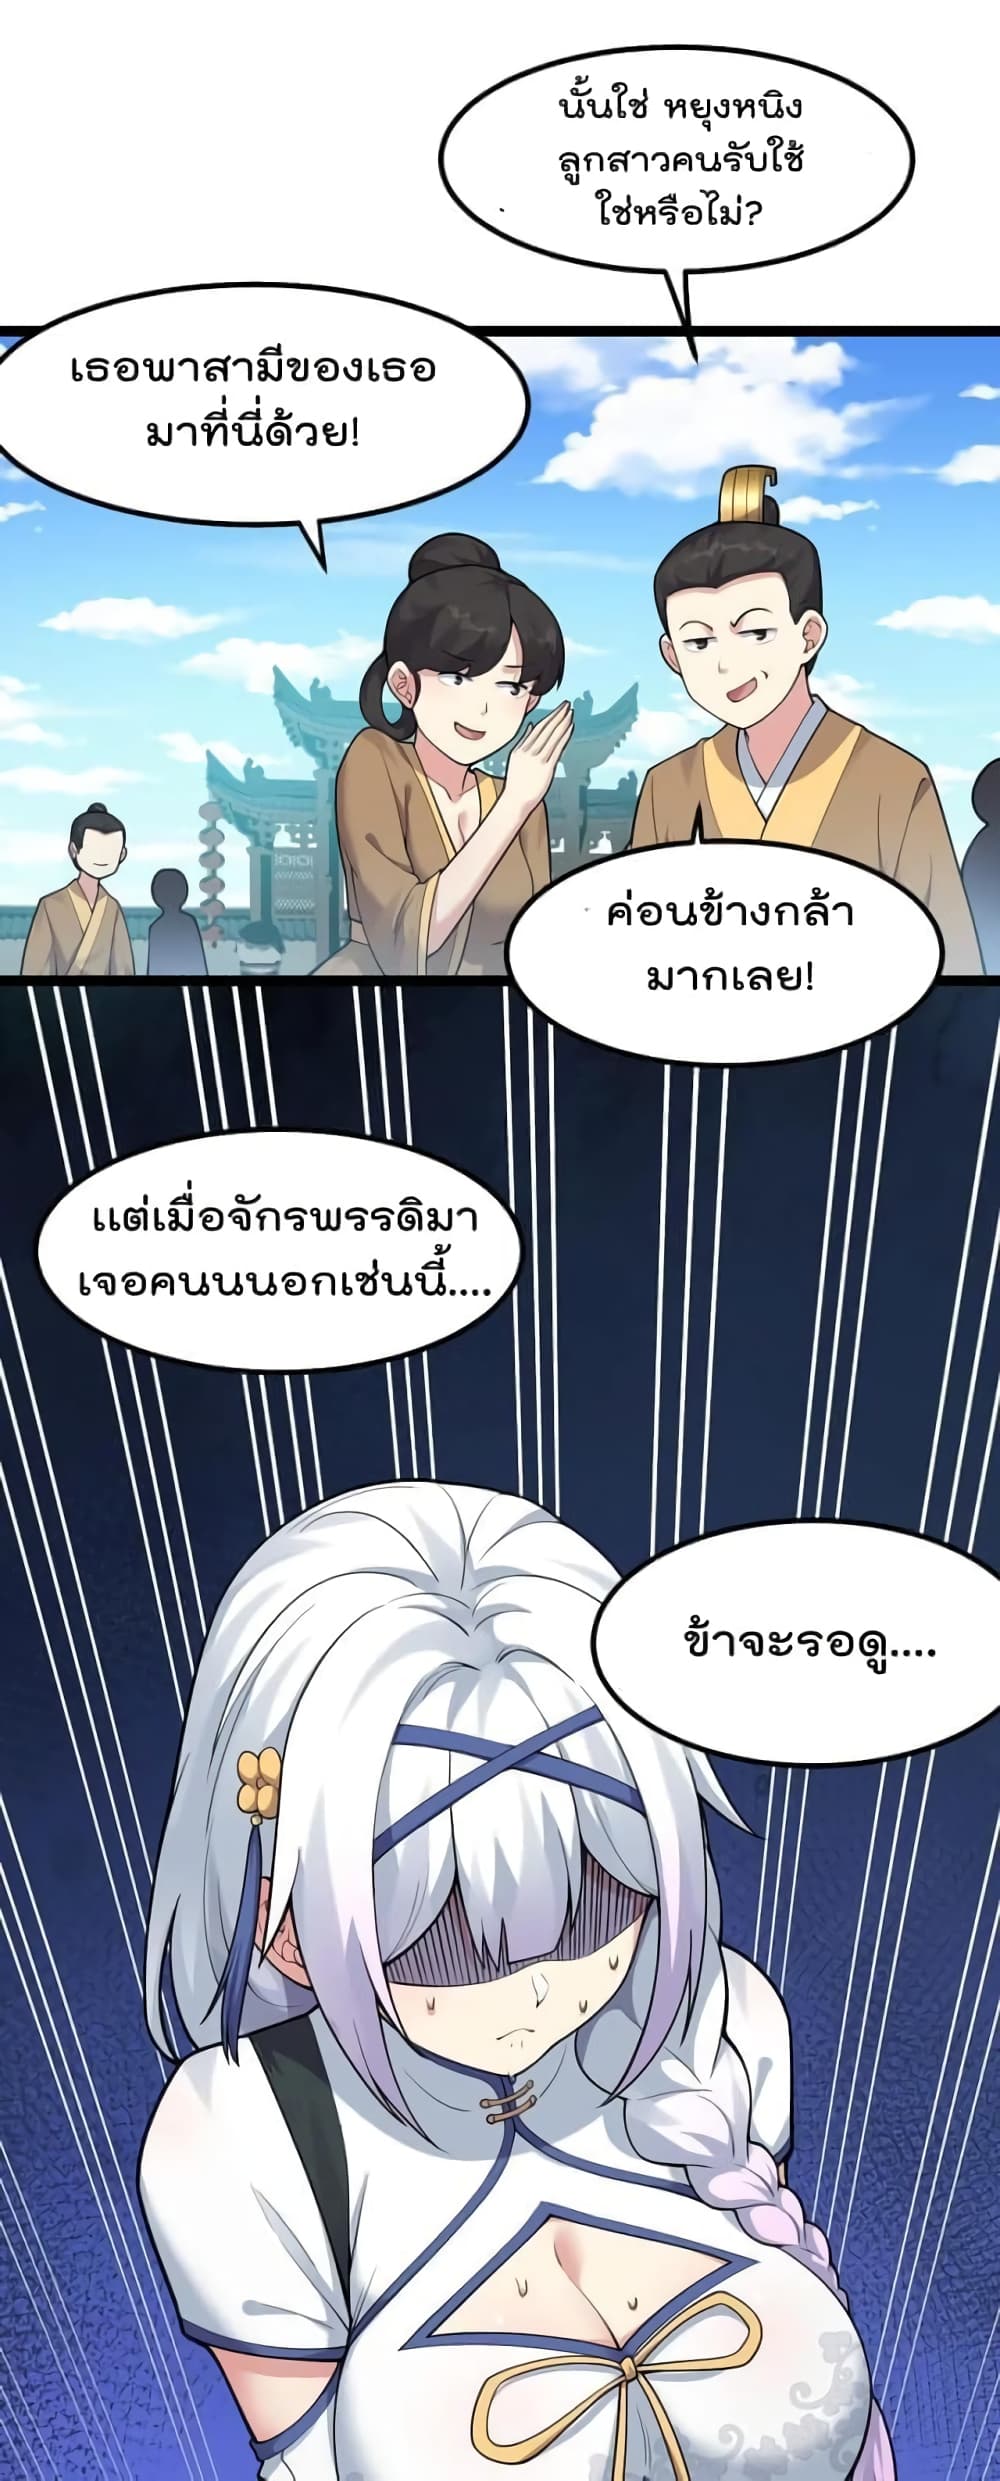 Godsian Masian from Another World ตอนที่ 114 (17)